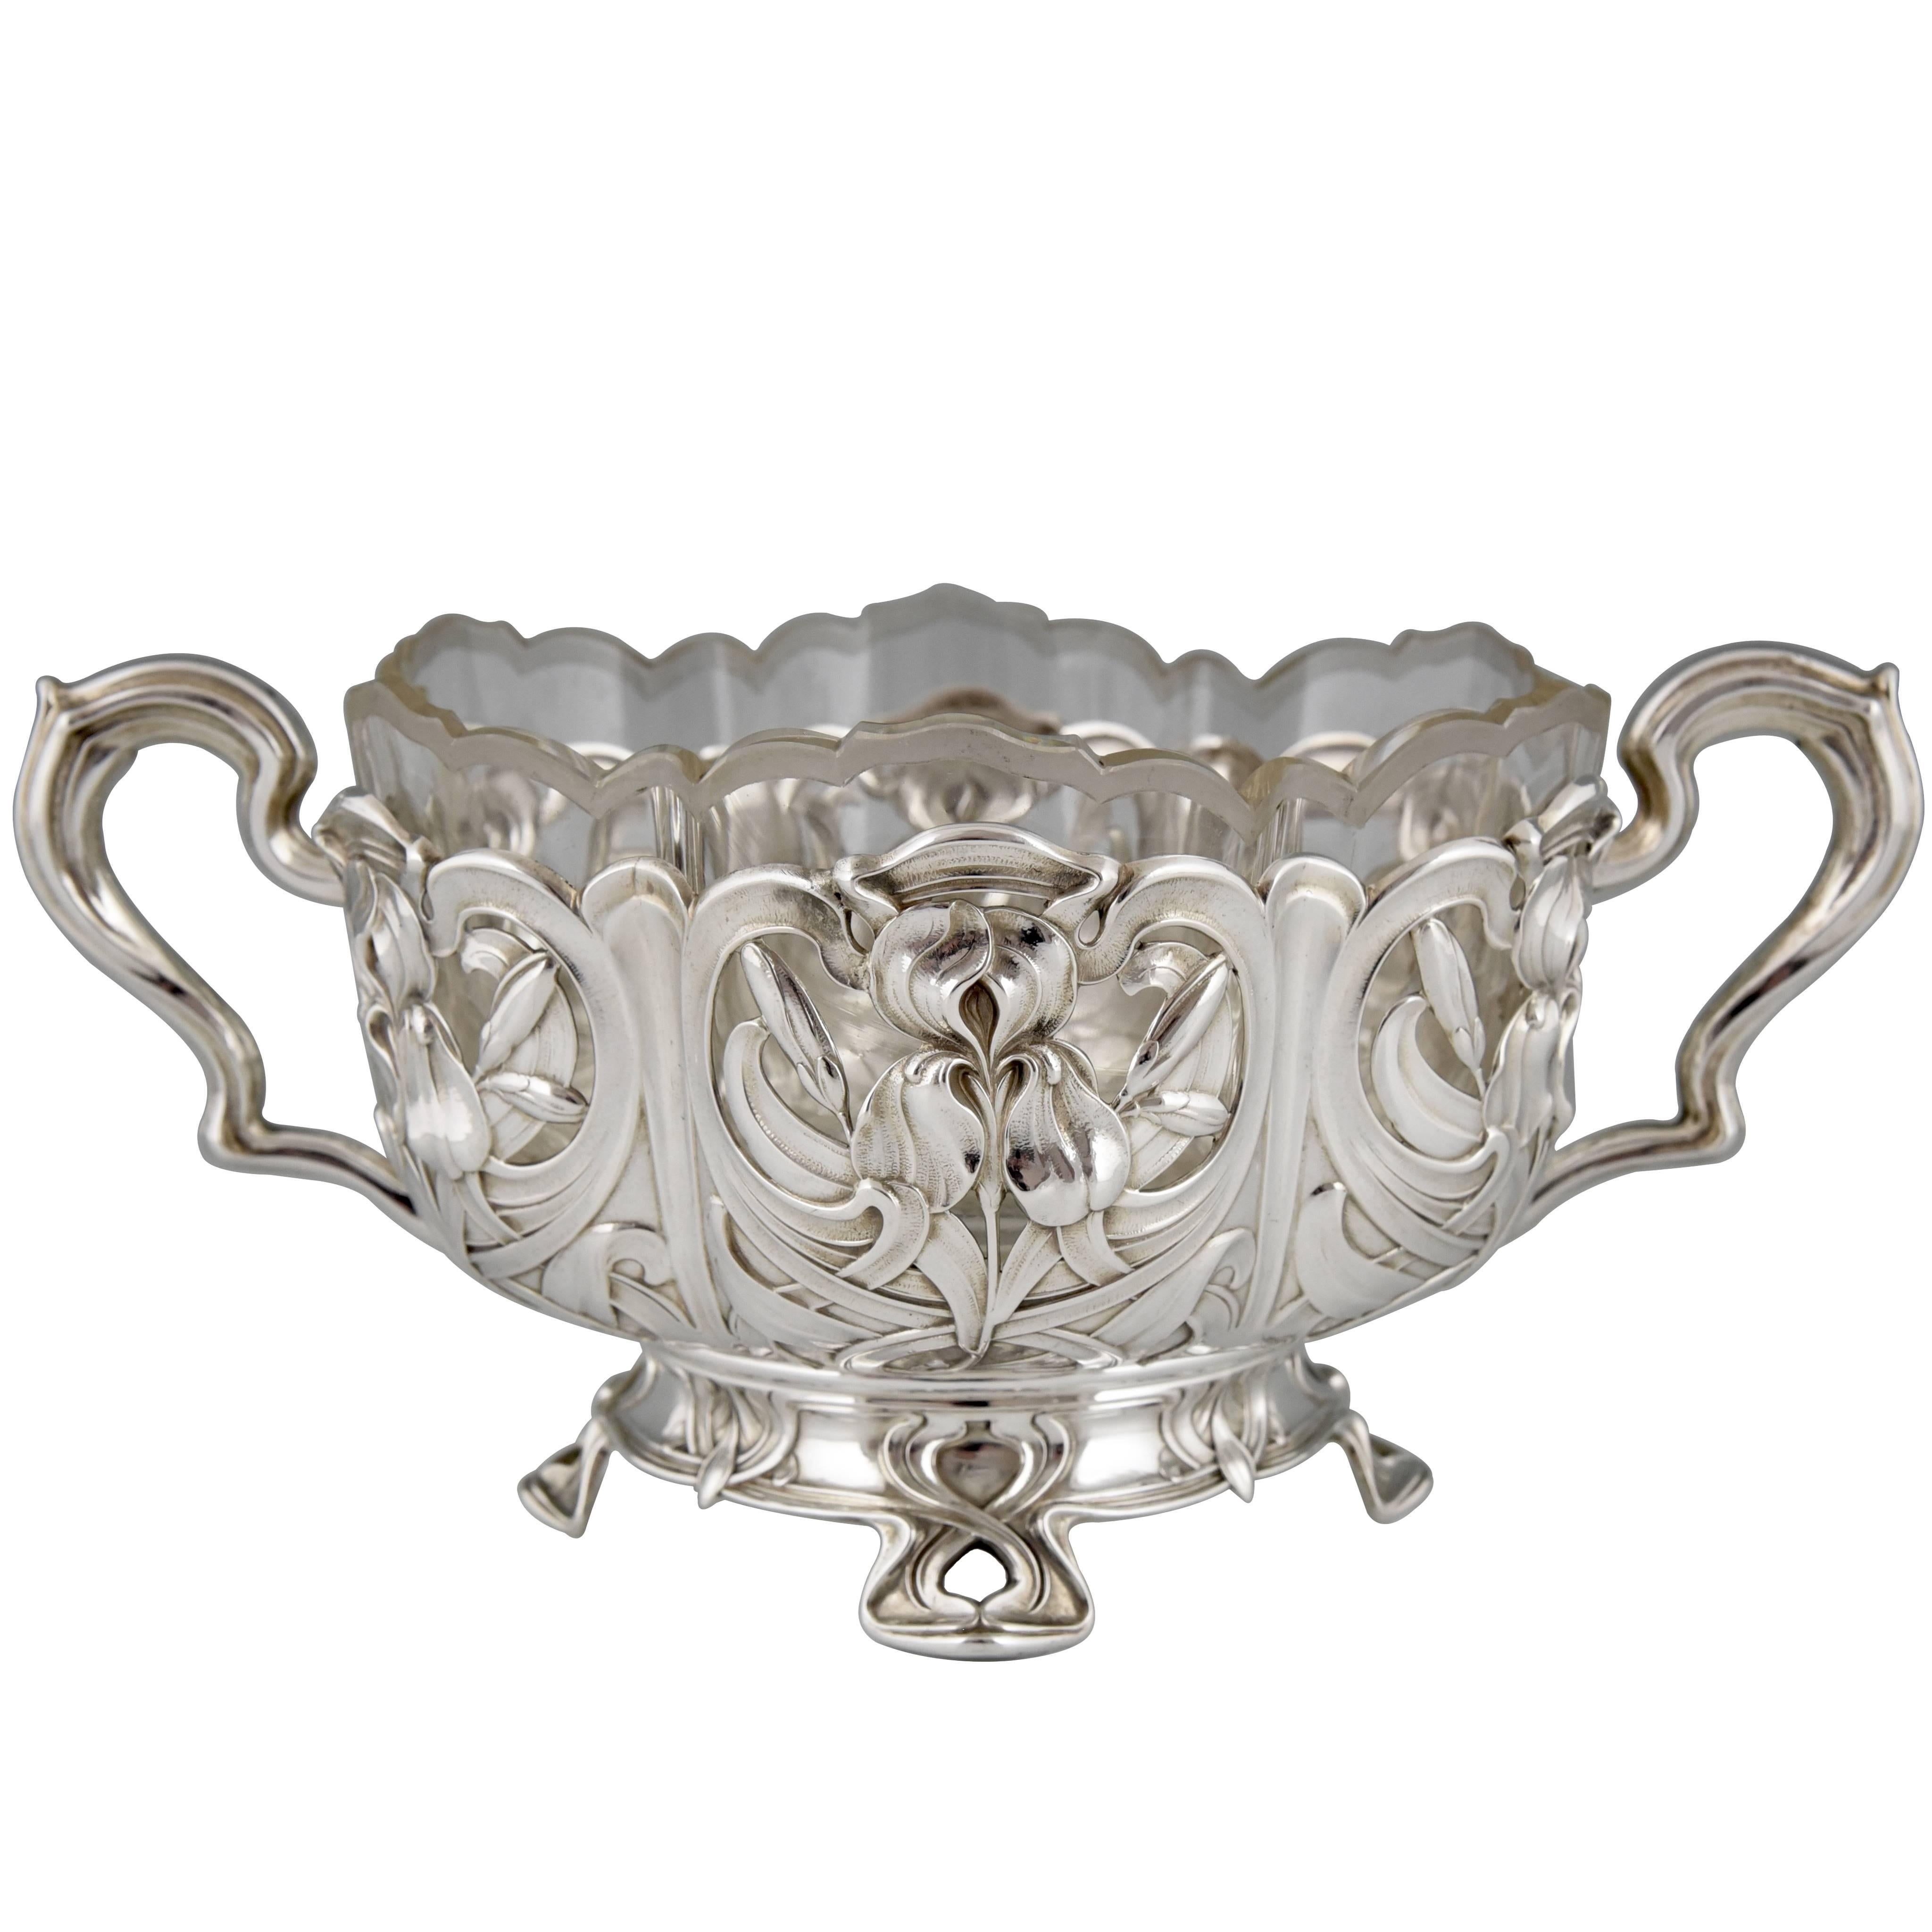 German Art Nouveau silver flower dish with glass liner by A. Strobl, 1900.